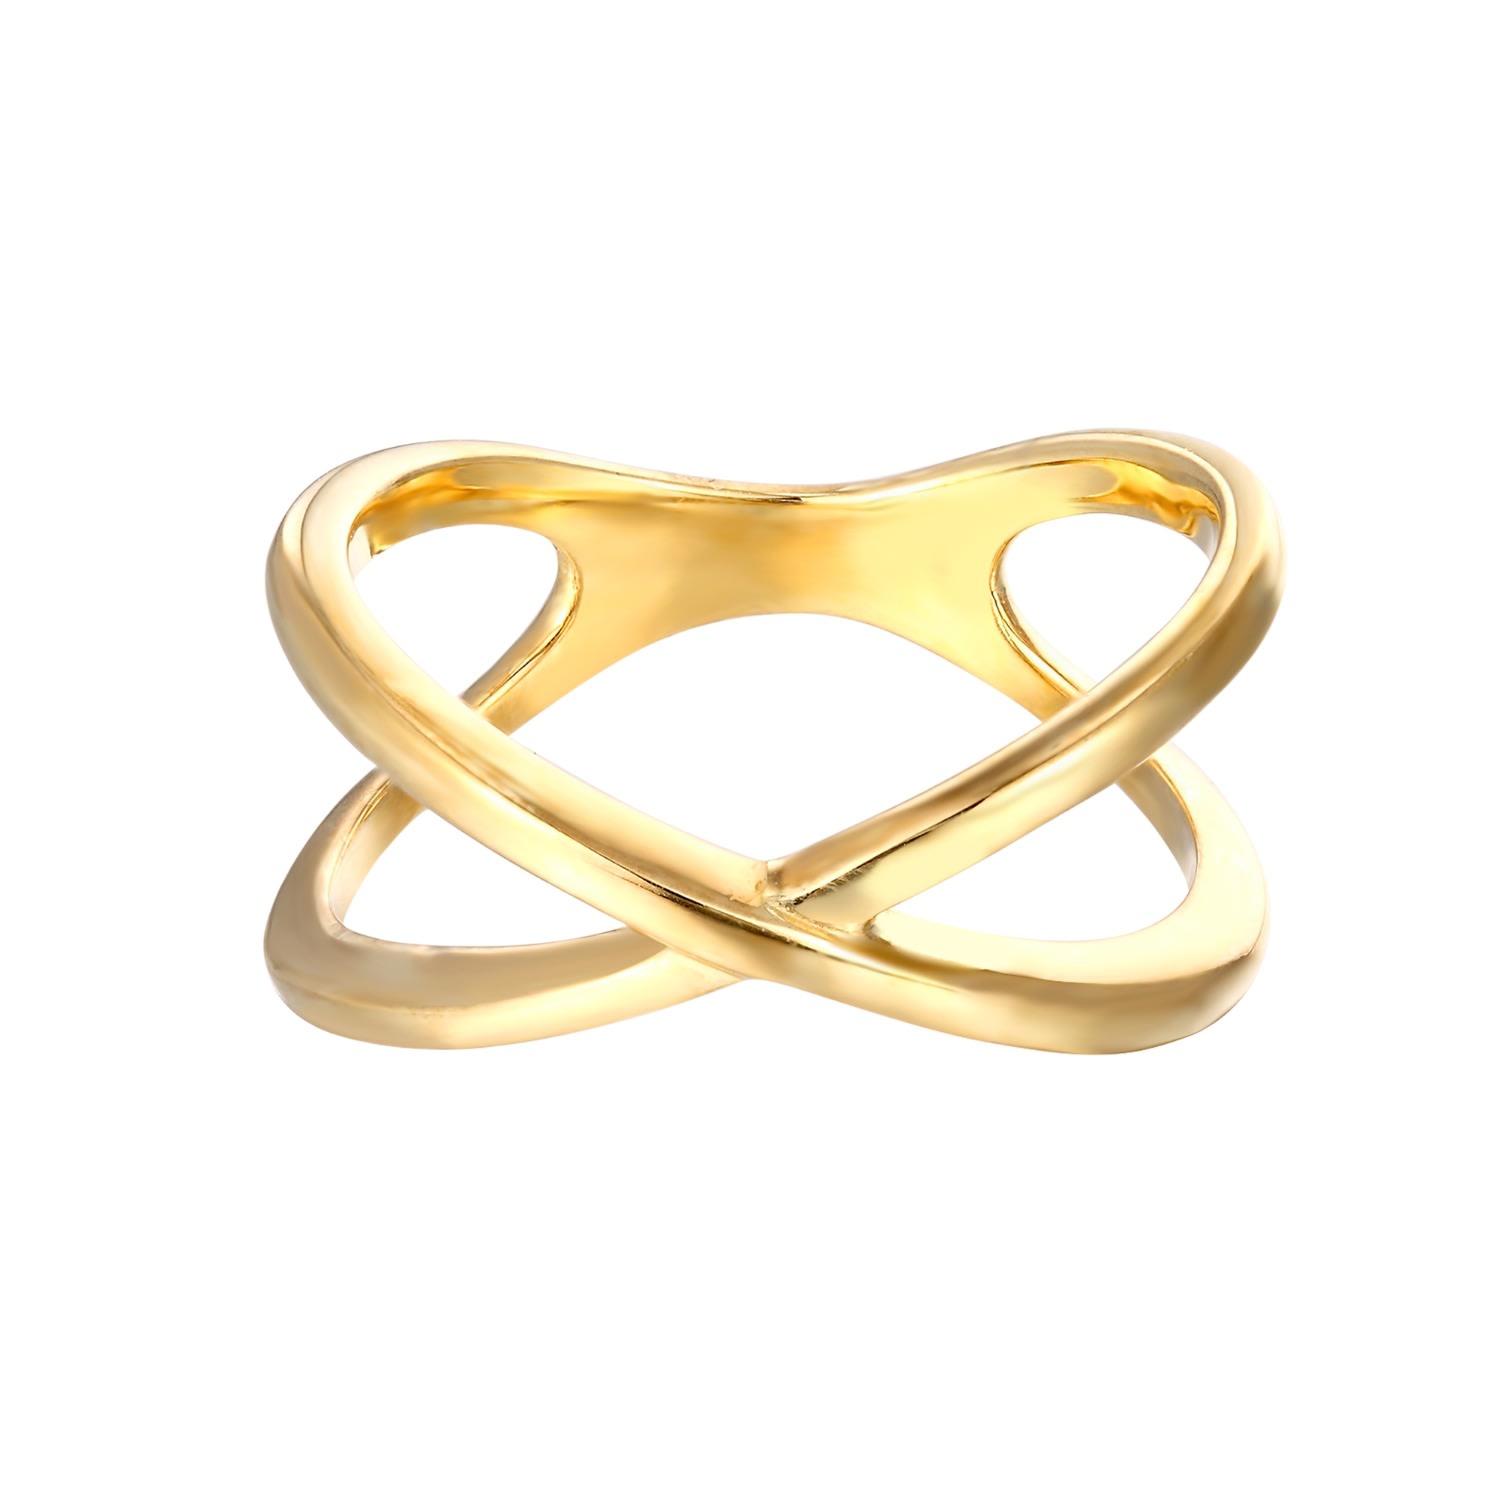 Women’s 22Ct Gold Vermeil Crossover Stacking Ring Seol + Gold